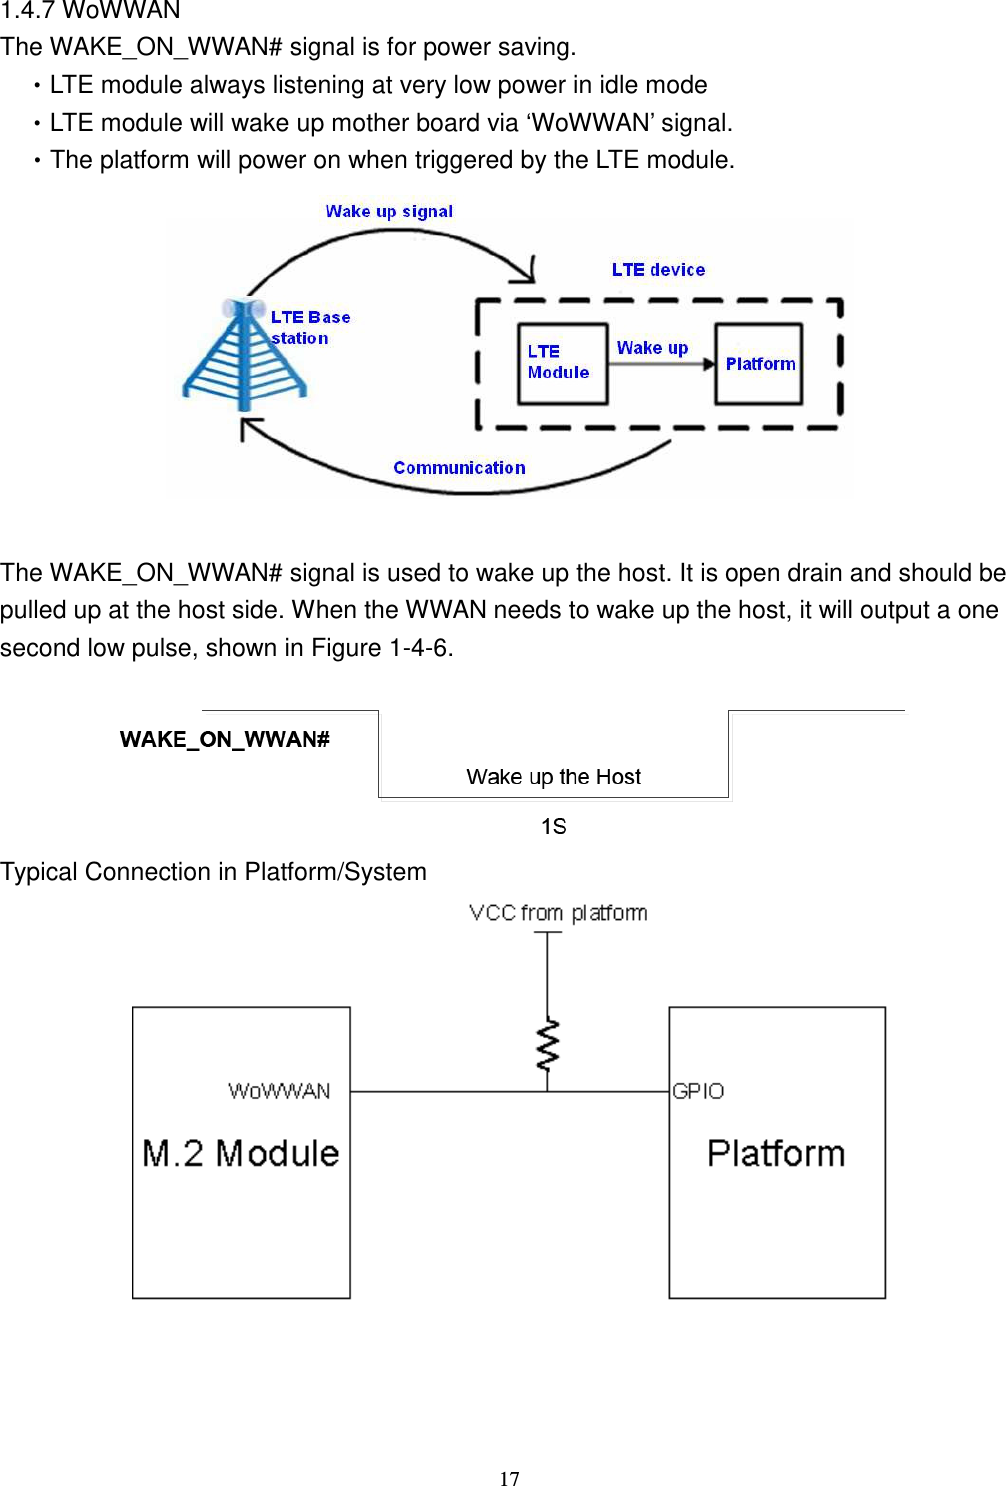    17 1.4.7 WoWWAN The WAKE_ON_WWAN# signal is for power saving.   •LTE module always listening at very low power in idle mode •LTE module will wake up mother board via ‘WoWWAN’ signal. •The platform will power on when triggered by the LTE module.   The WAKE_ON_WWAN# signal is used to wake up the host. It is open drain and should be pulled up at the host side. When the WWAN needs to wake up the host, it will output a one second low pulse, shown in Figure 1-4-6.  Typical Connection in Platform/System   